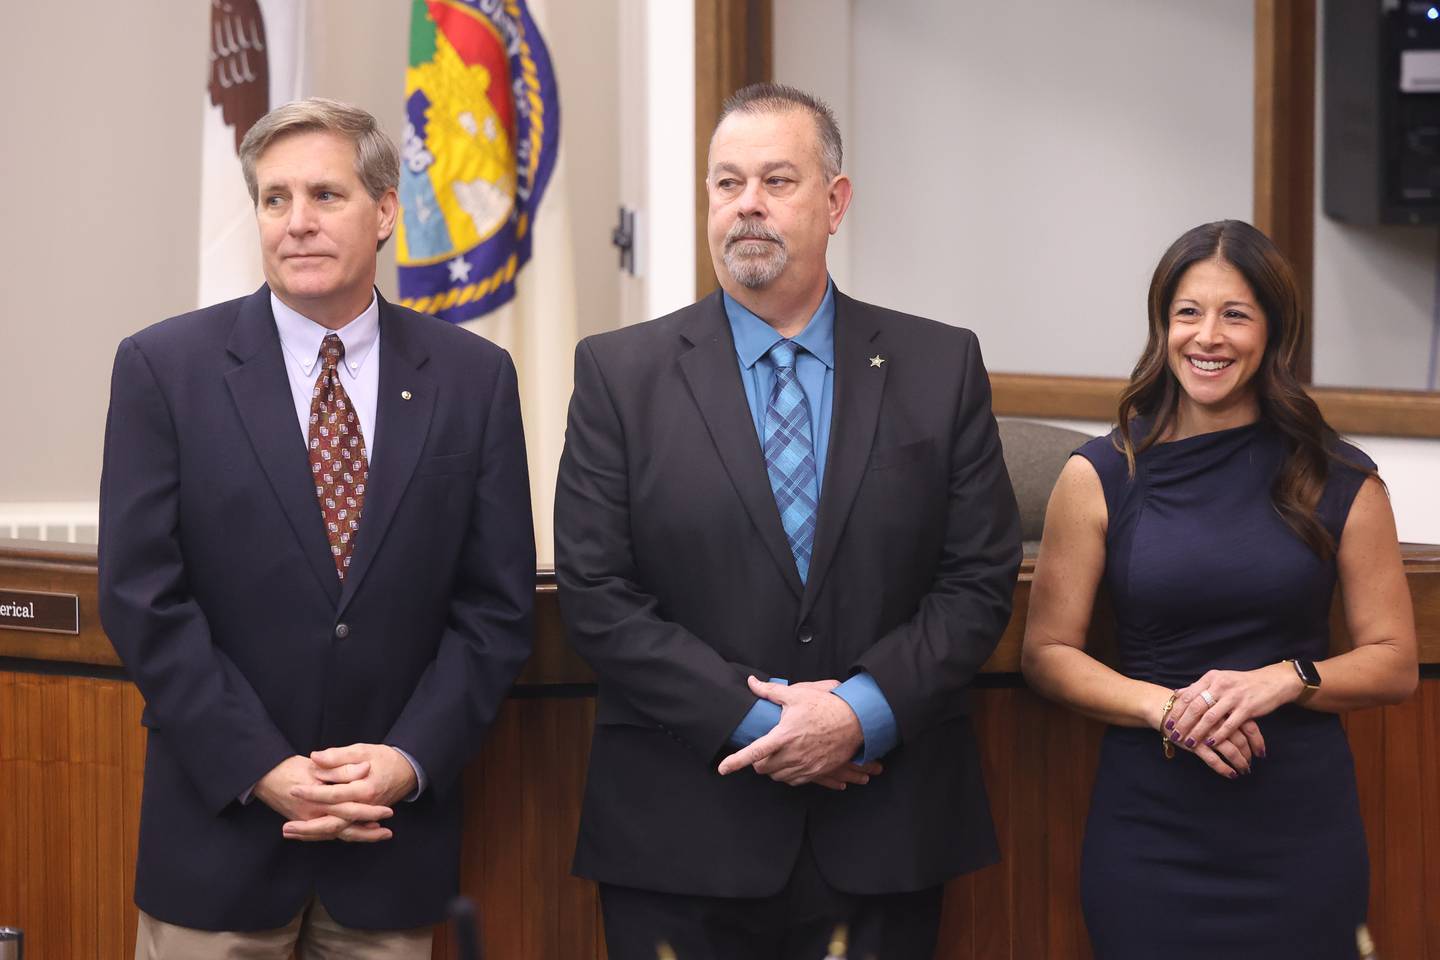 Will County elected officials Tim Brophy, Mike Kelley and Lauren Staley-Ferry stand for their swearing-in ceremony at the Will County Building in Joliet on Thursday.